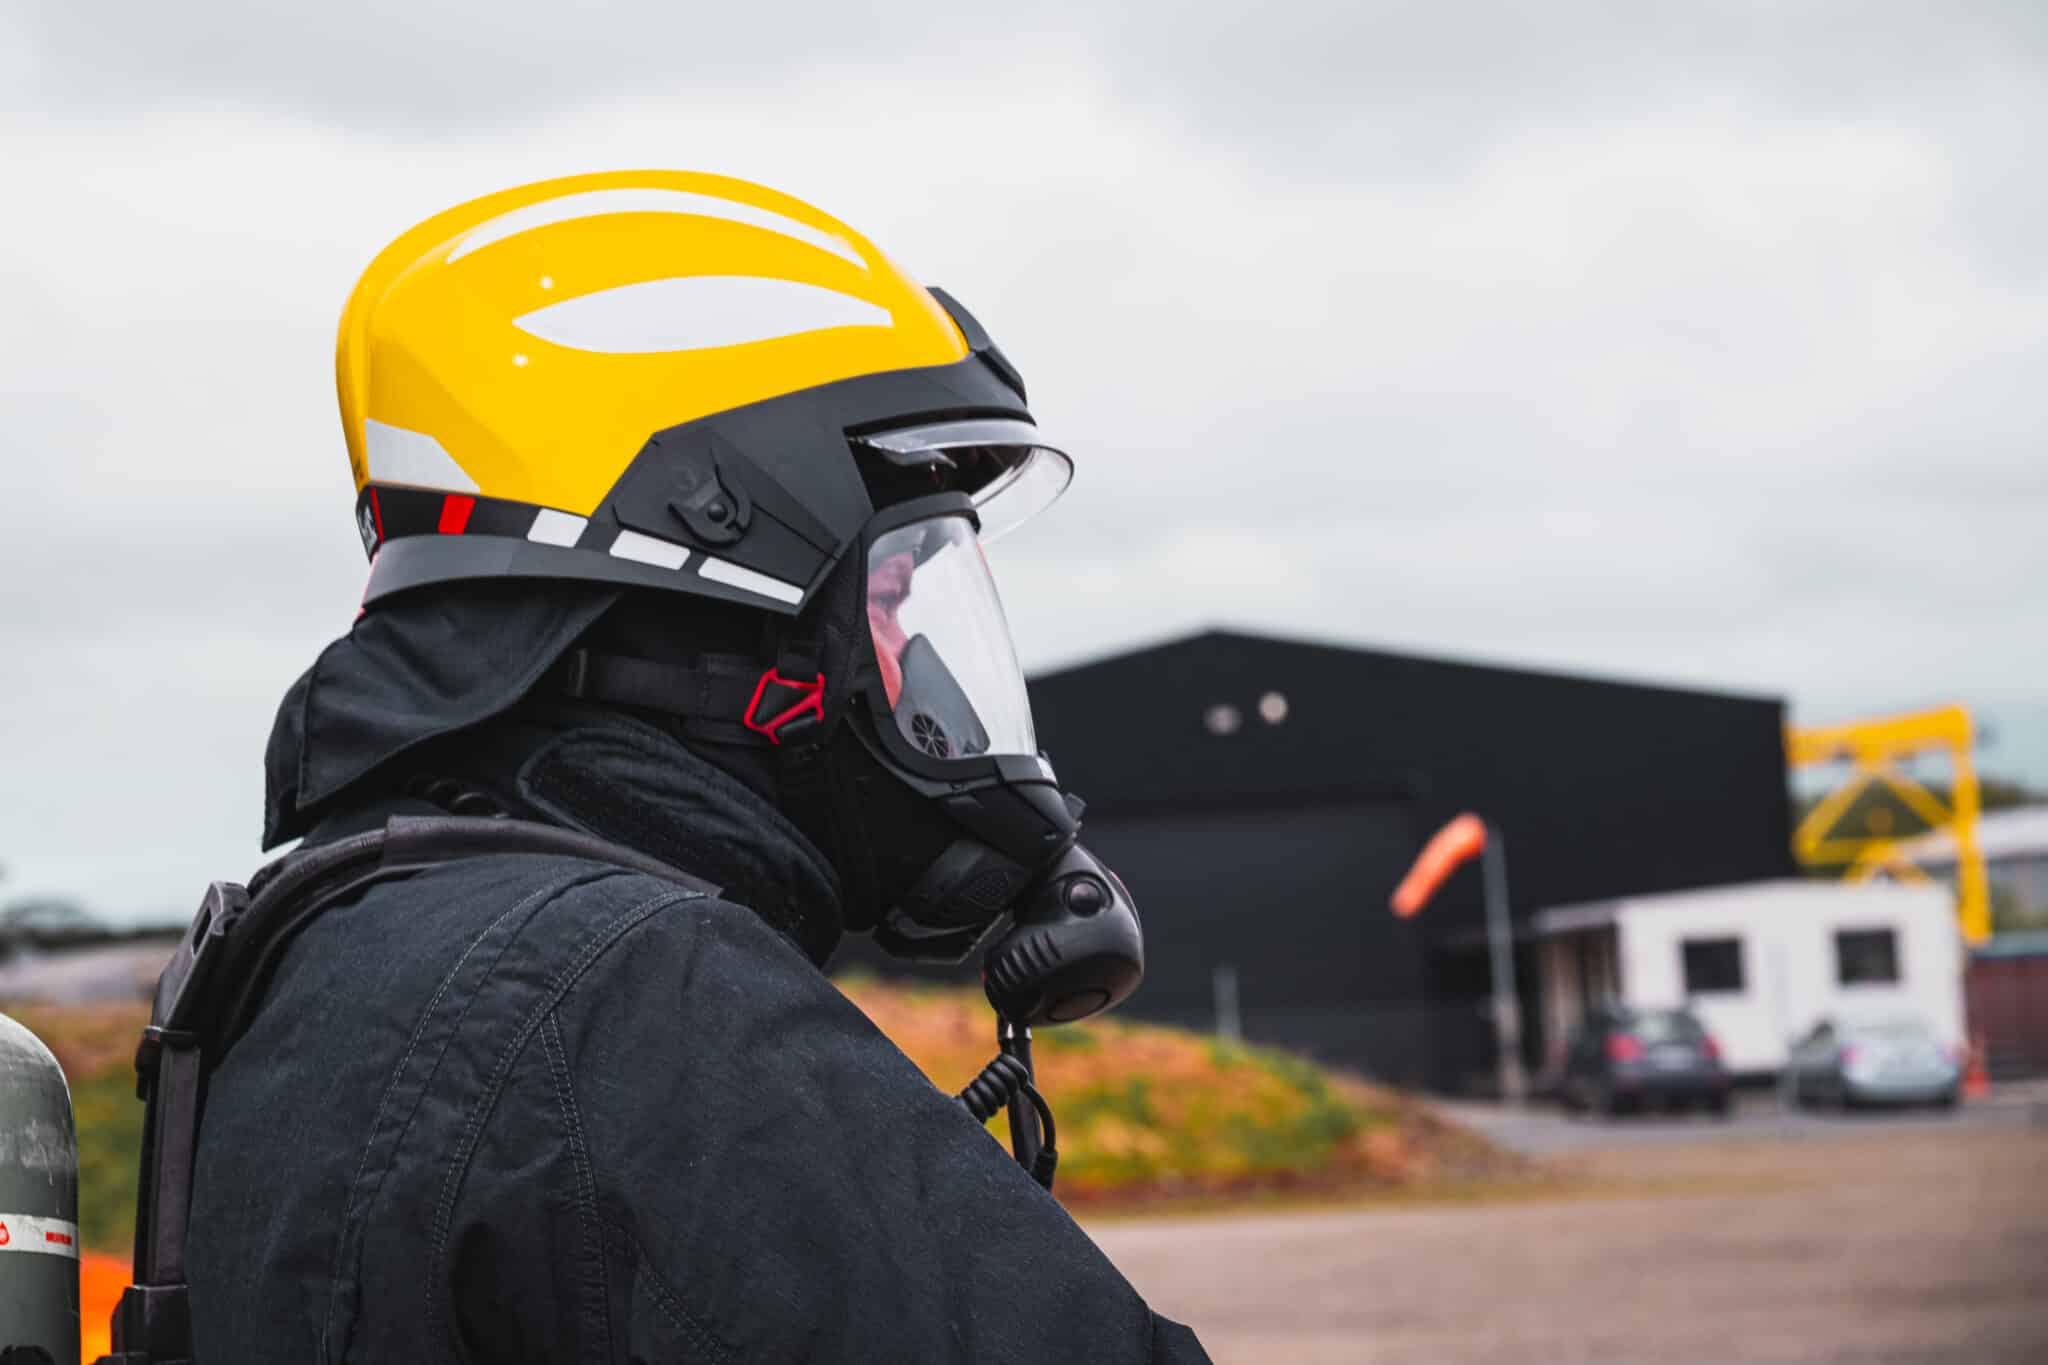 IFSJ Exclusive: Pacific Helmets talks safety without compromise